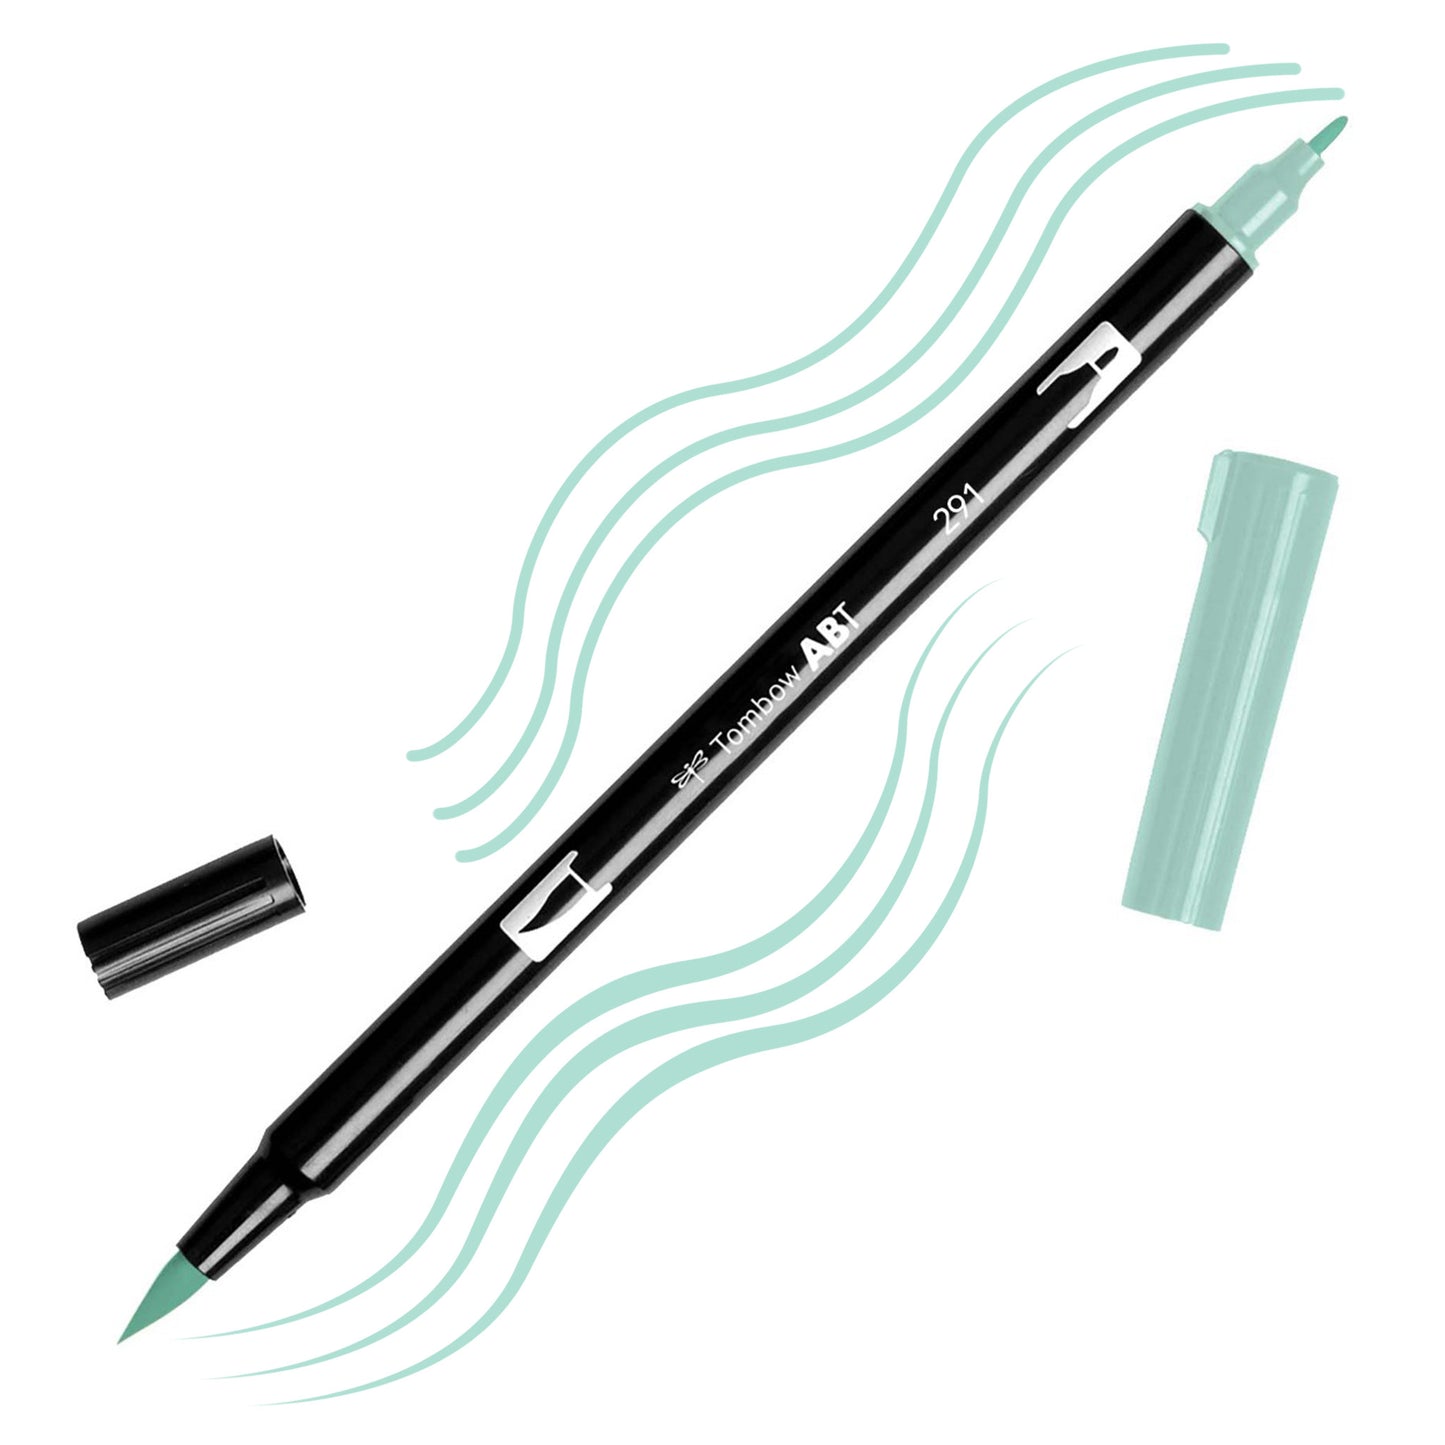 Alice Blue Tombow double-headed brush-pen with a flexible nylon fiber brush tip and a fine tip against a white background with Alice Blue strokes